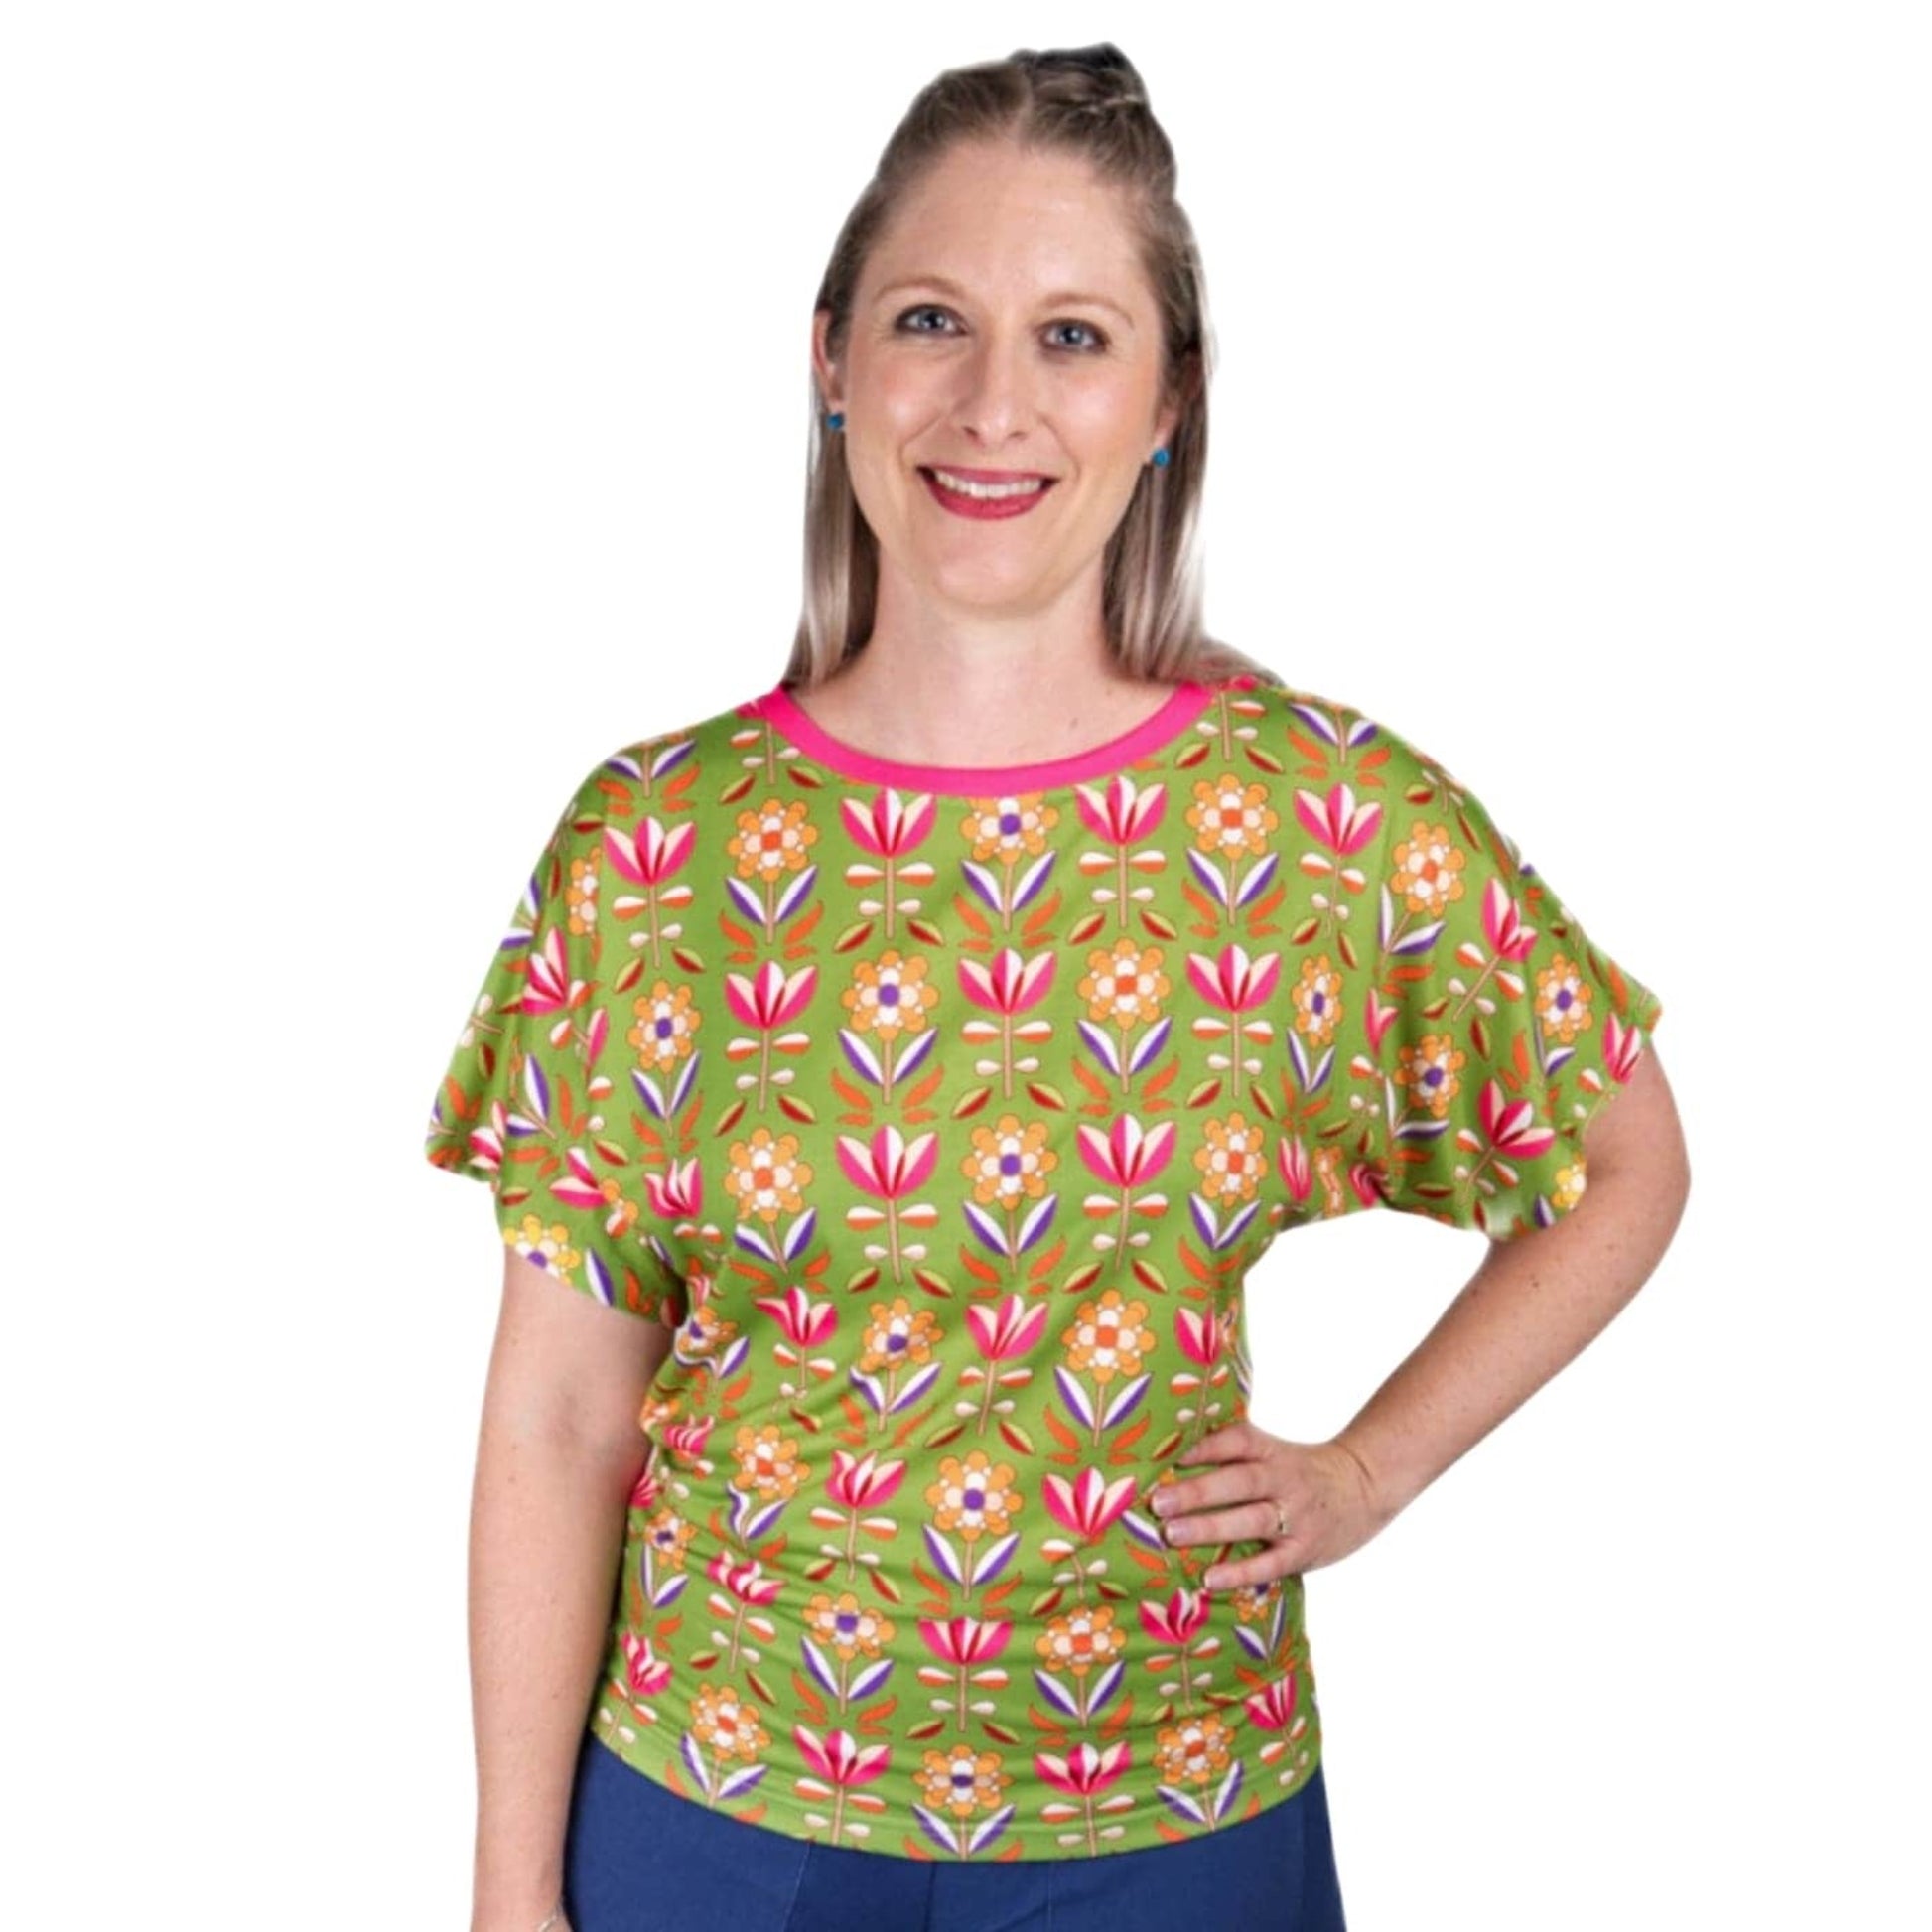 Retro Flower Batwing Top by RainbowsAndFairies.com.au (70s Wallpaper - Floral Print - Psychedelic - Tulip - Vintage Inspired - Kitsch - Knit Top - Mod) - SKU: CL_BATOP_RETFL_ORG - Pic-05